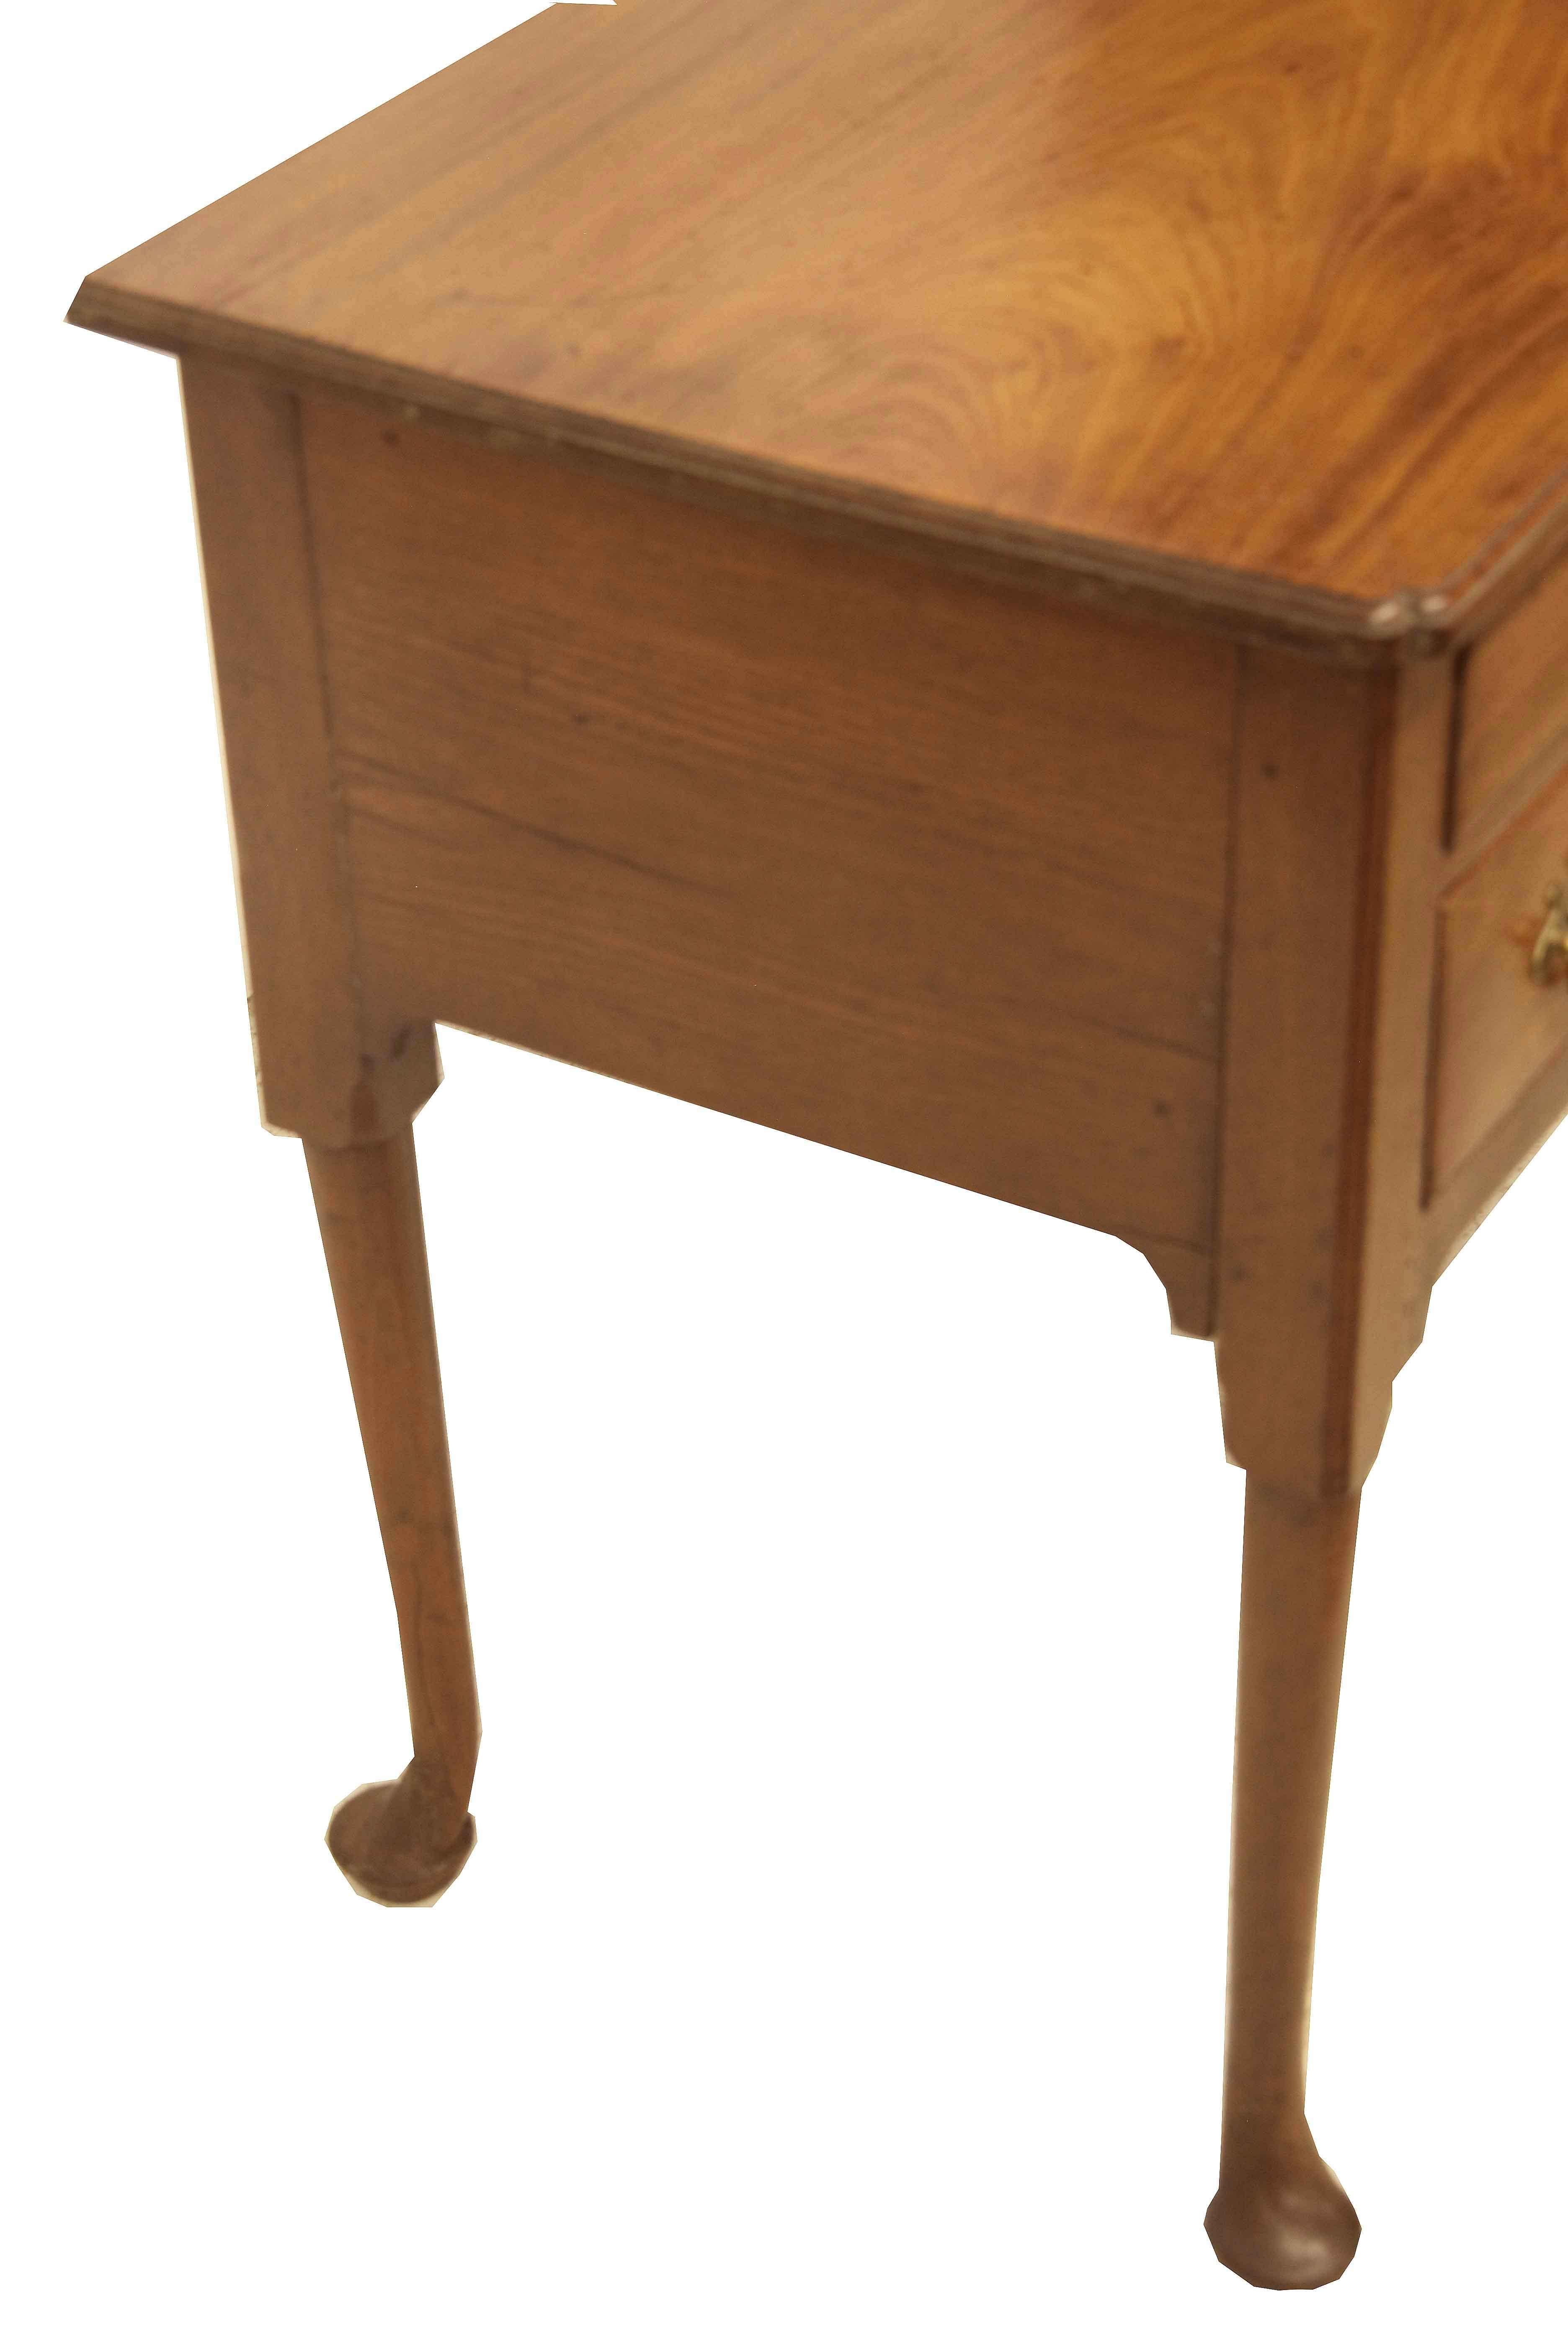 18th century Queen Anne lowboy, the swirl grain top has a beautiful faded color and patina with a molded edge and ''pinched'' front corners. The drawers have reticulated brass pulls and escutcheon, incised line molding. The nicely shaped legs